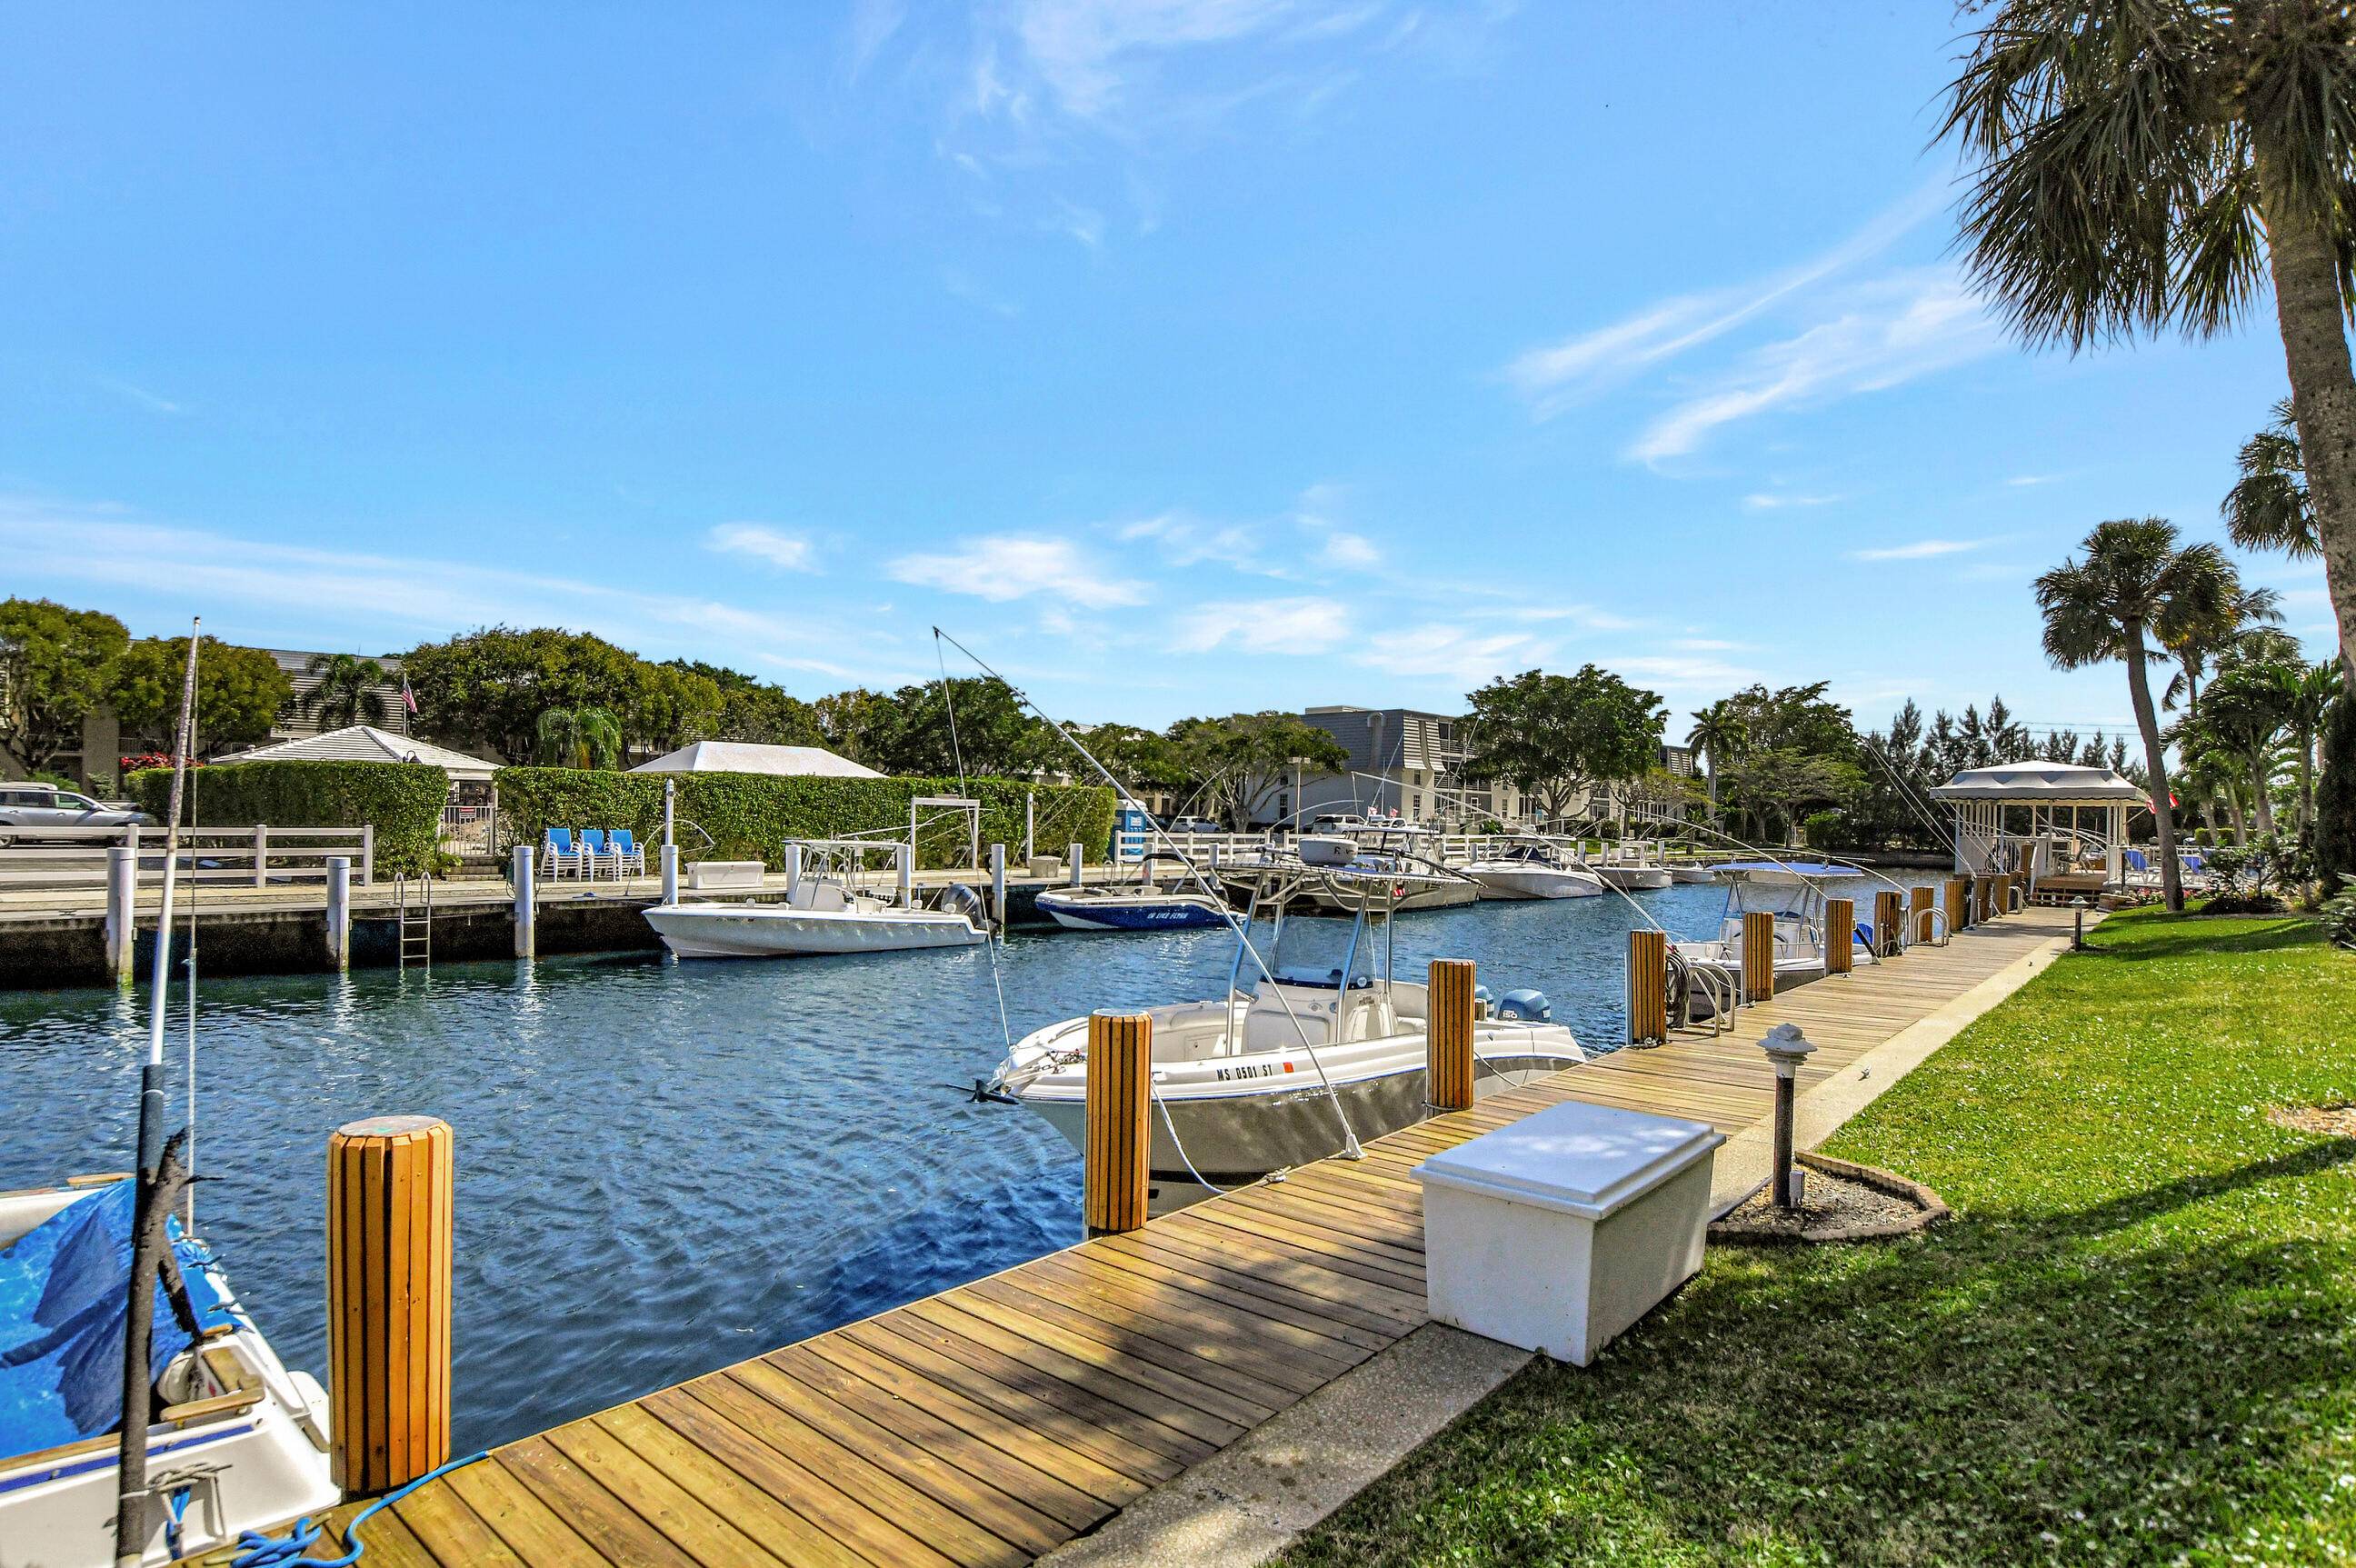 Enjoy the waterfront living in this East Boca Raton condo located on an interior canal.